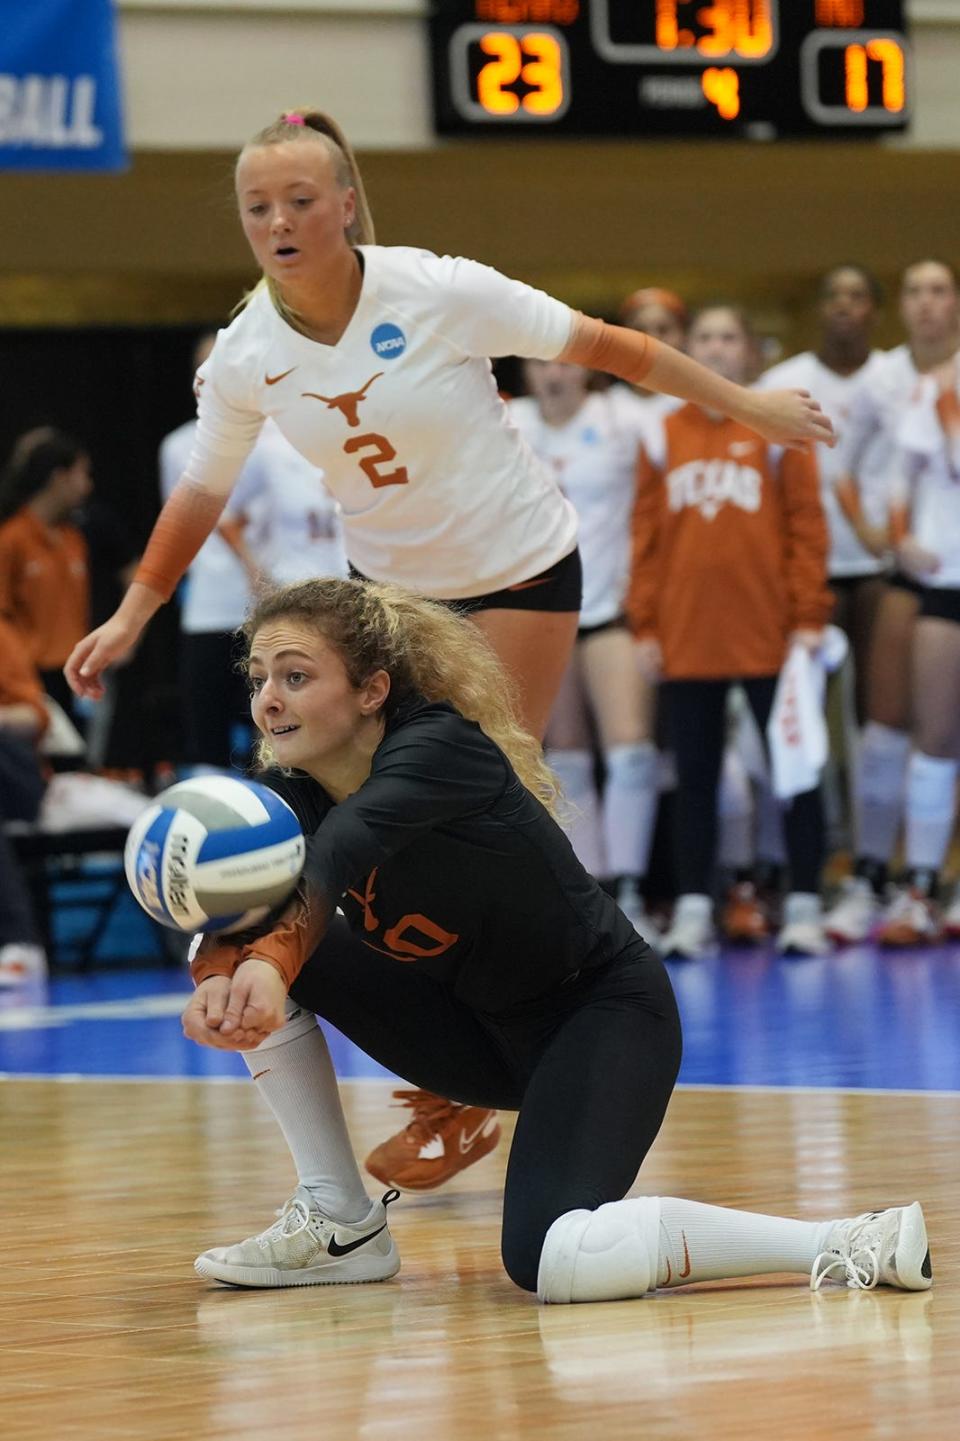 Texas libero Zoe Fleck bumps the ball during the Longhorns' Sweet 16 win over Marquette. The UCLA transfer has been solid defensively all season for the Longhorns.